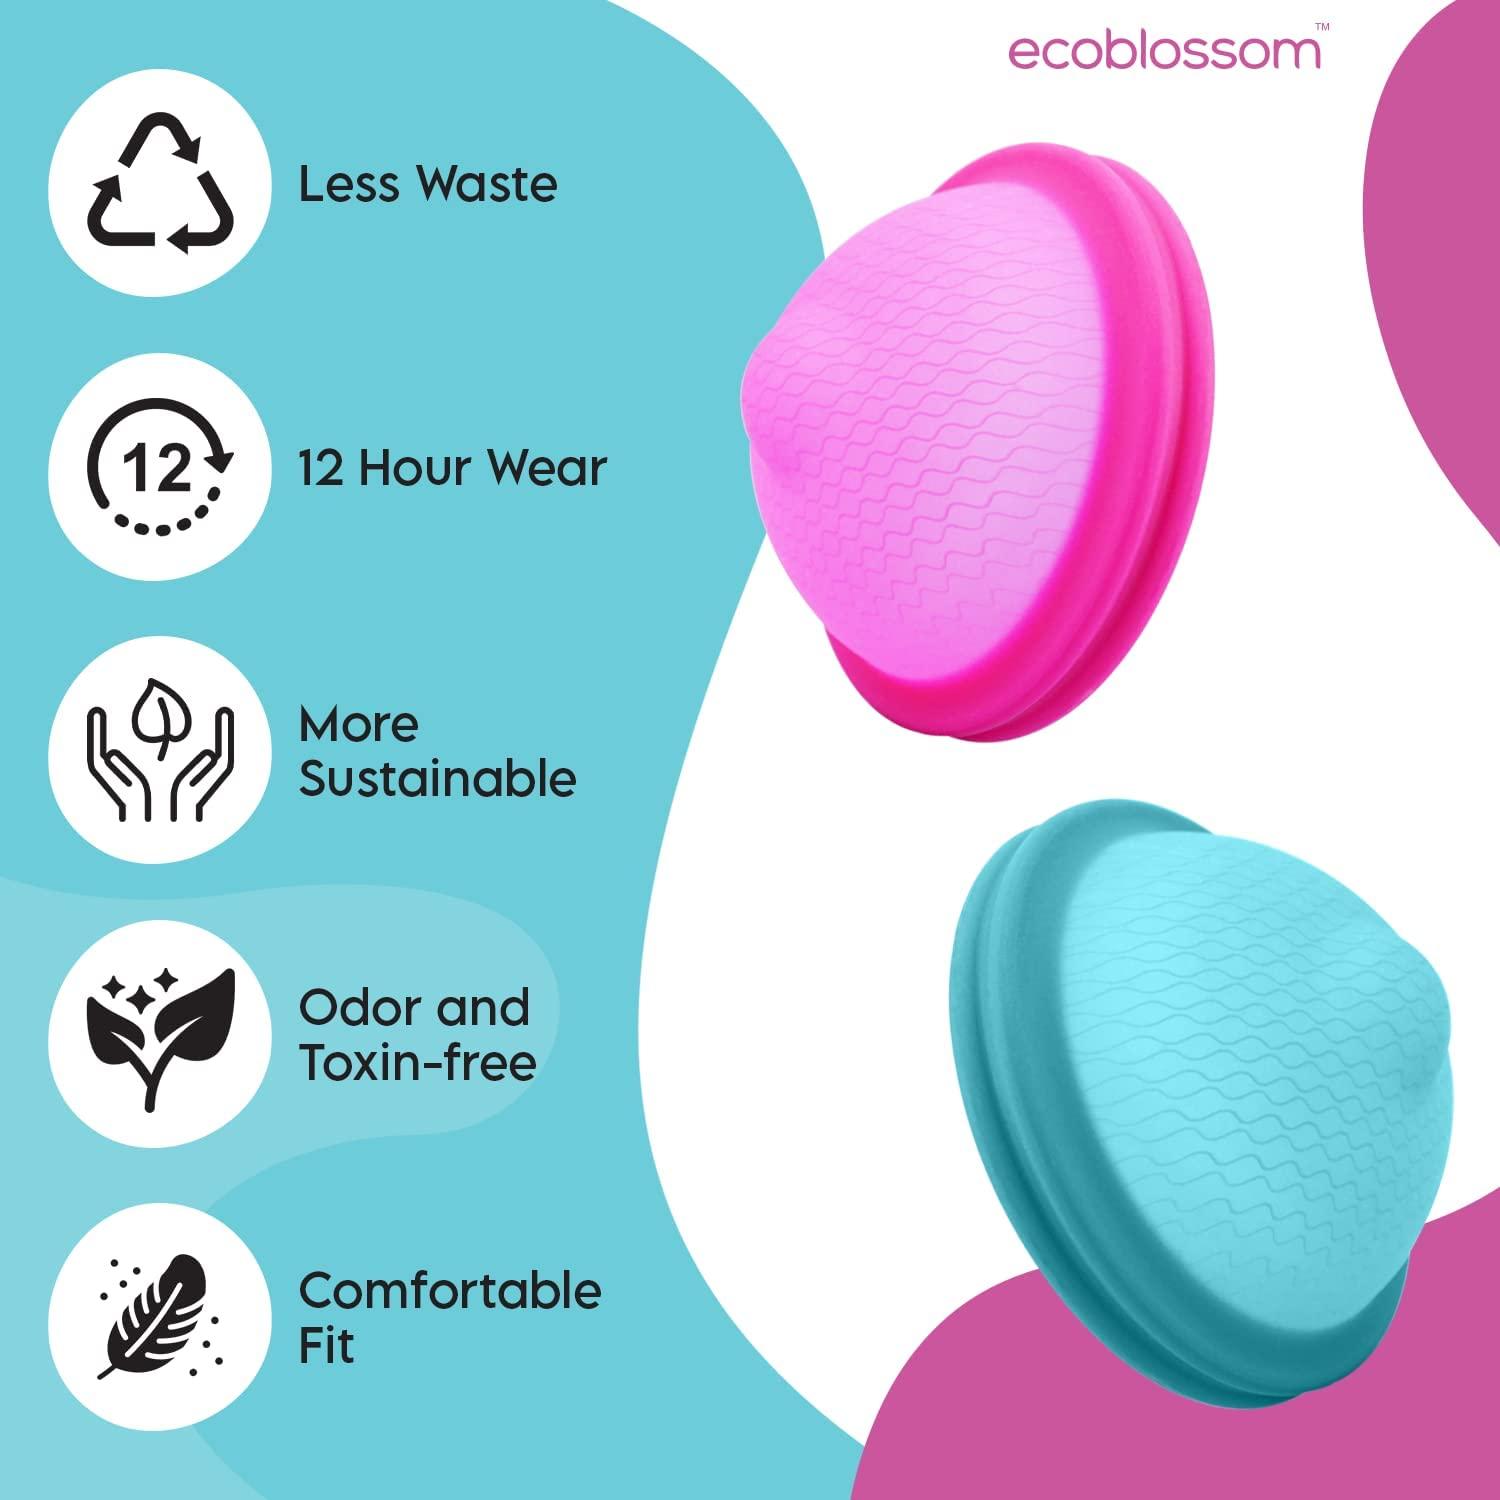 Reusable Period Products: Menstrual Discs, Period Underwear, And More